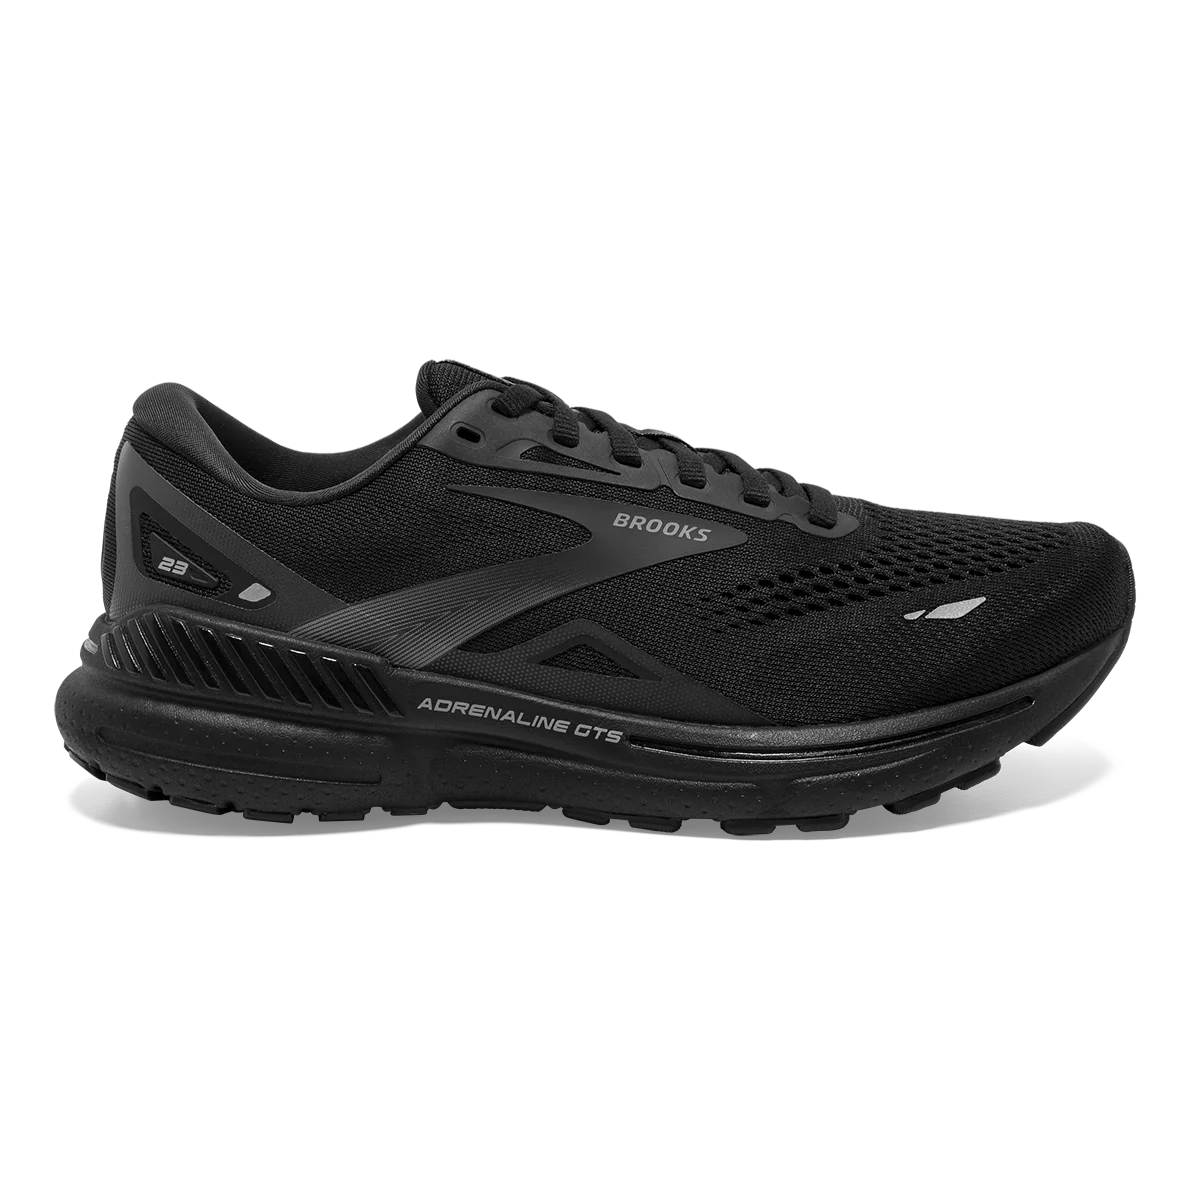 Lateral view of the Women's Adrenaline GTS 23 by Brooks in the color Black/Black/Ebony